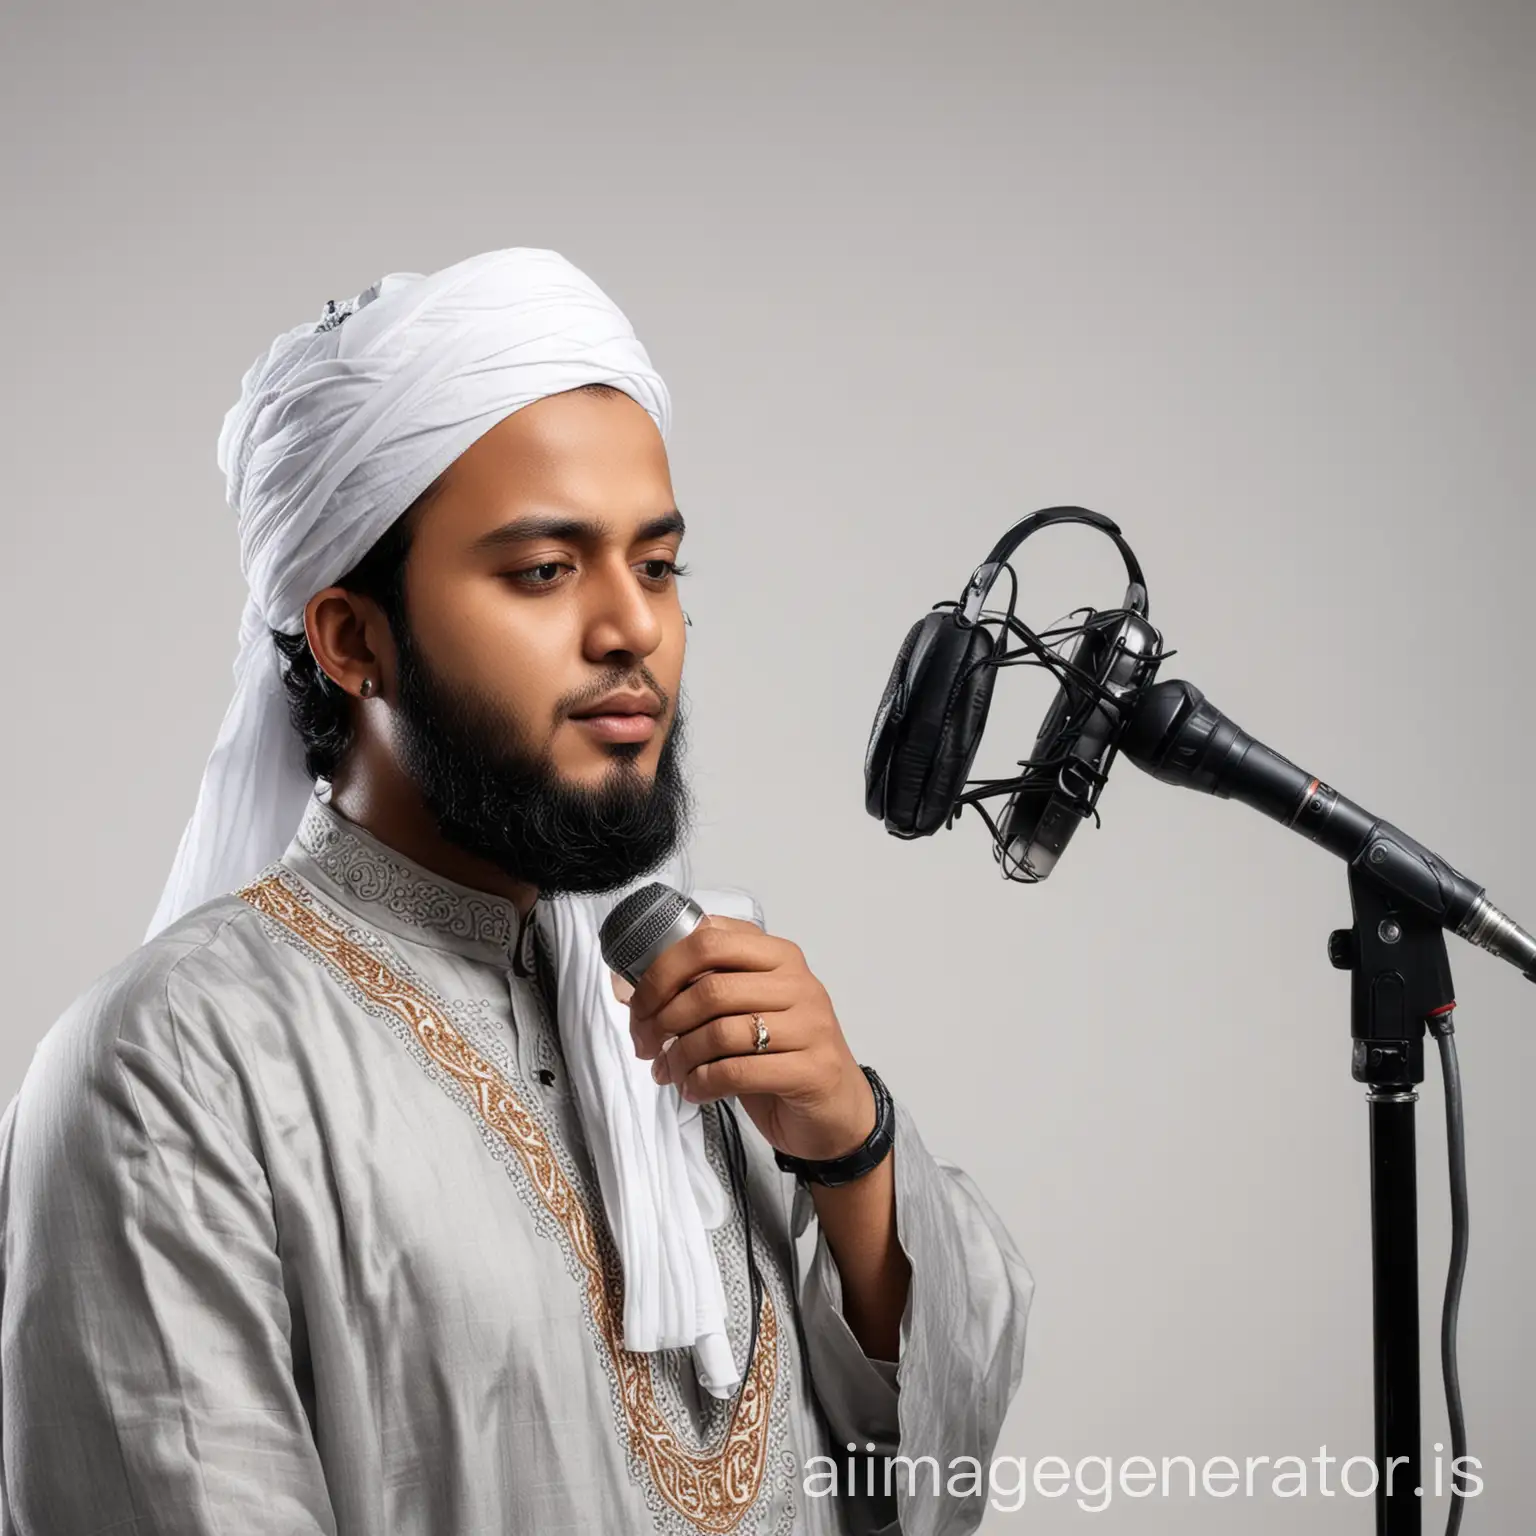 A Bangladeshi Muslim singer recording his song in white background wearing a beautiful jubba. Headphone on his head and in front of a condenser microphone